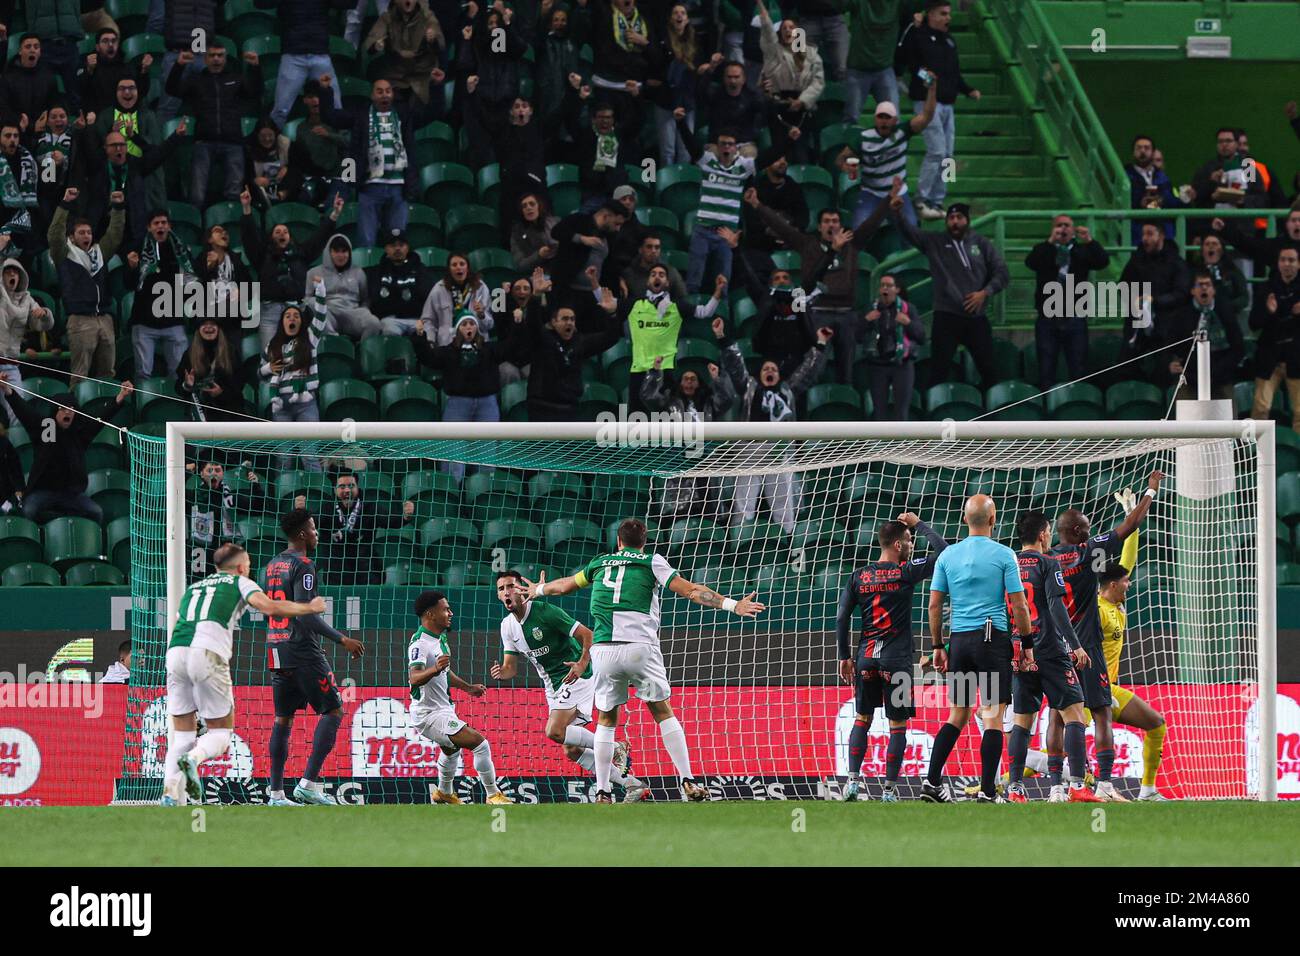 Lisbon, Portugal. 19th Dec, 2022. Goncalo Inacio (L4) of Sporting CP celebrates after scoring a goal during the Allianz Cup 2022/2023 match between Sporting CP and SC Braga at Estadio Jose Alvalade.(Final score: Sporting CP 5:0 SC Braga) (Photo by David Martins/SOPA Images/Sipa USA) Credit: Sipa USA/Alamy Live News Stock Photo